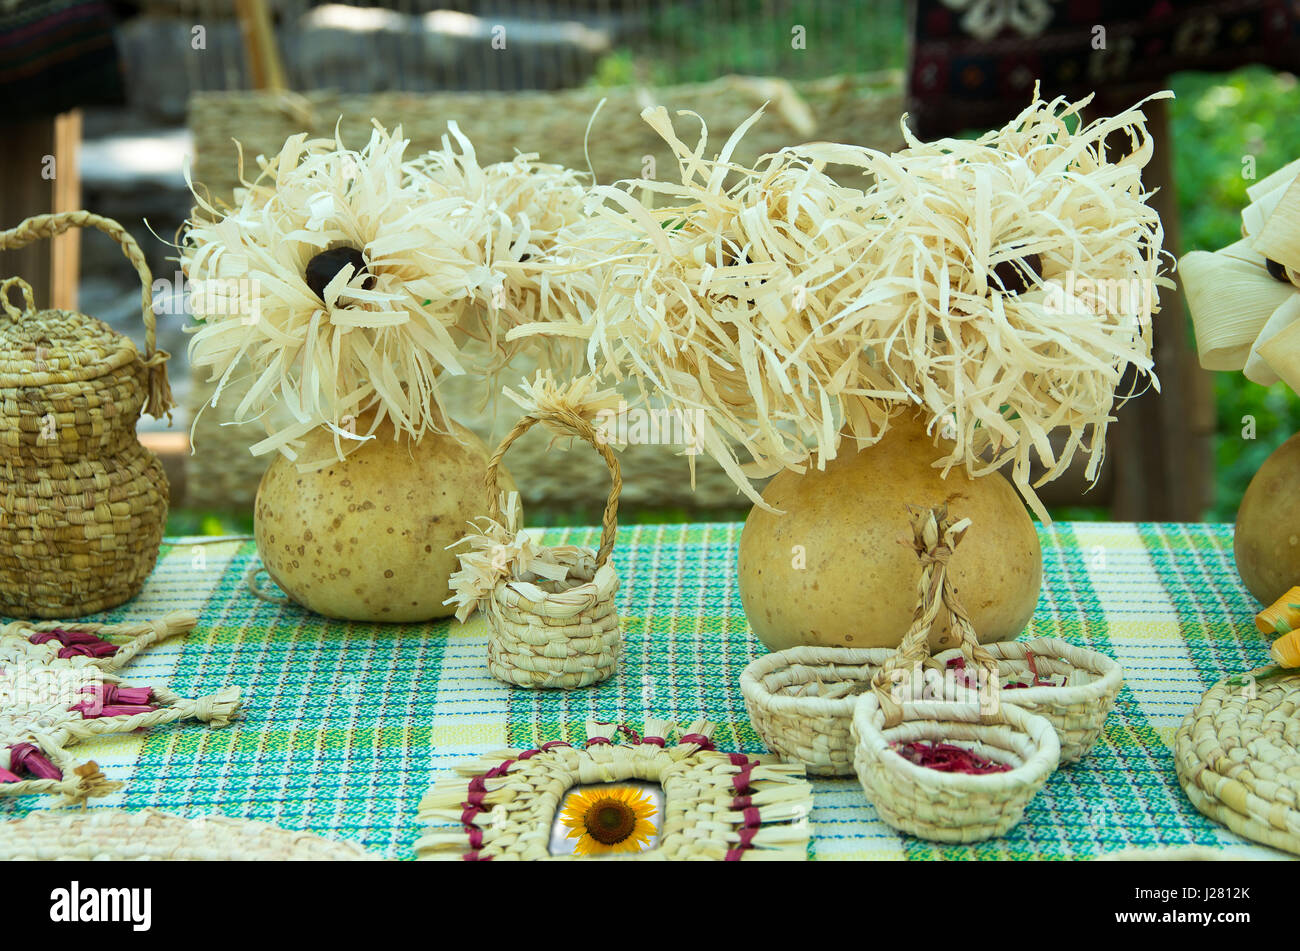 Table decoration of natural materials - maize husk and   gourds. Flowers, vases and other objects Stock Photo